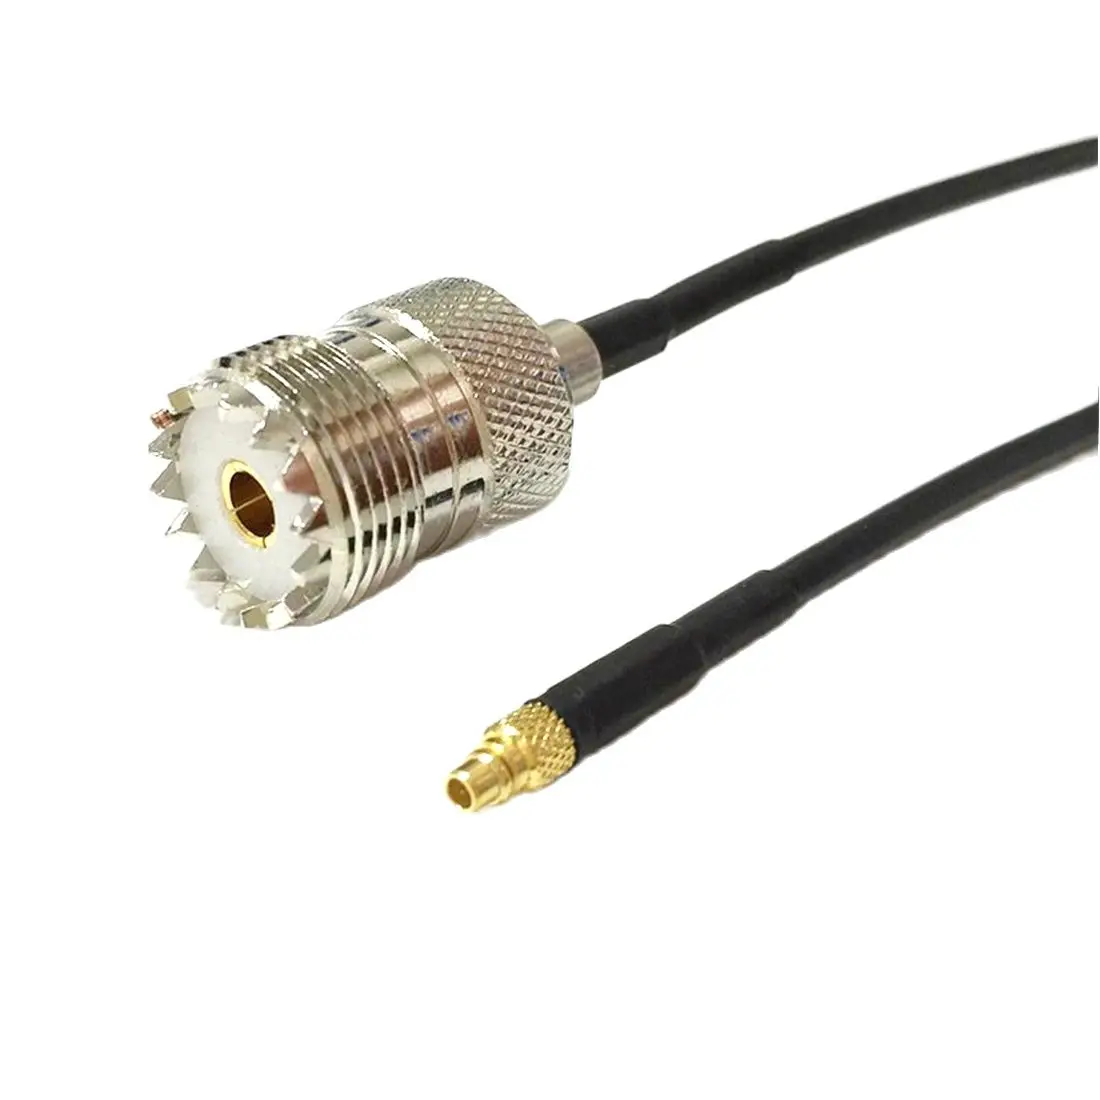 New Modem Coaxial Cable UHF Female Jack Connector Switch MMCX Male Plug Connector RG174 Cable 20CM 8inch Adapter ugreen 1 5m 3 5mm aux cable trrs cable male to male audio stereo jack hifi cable for cellphone speaker car headphone